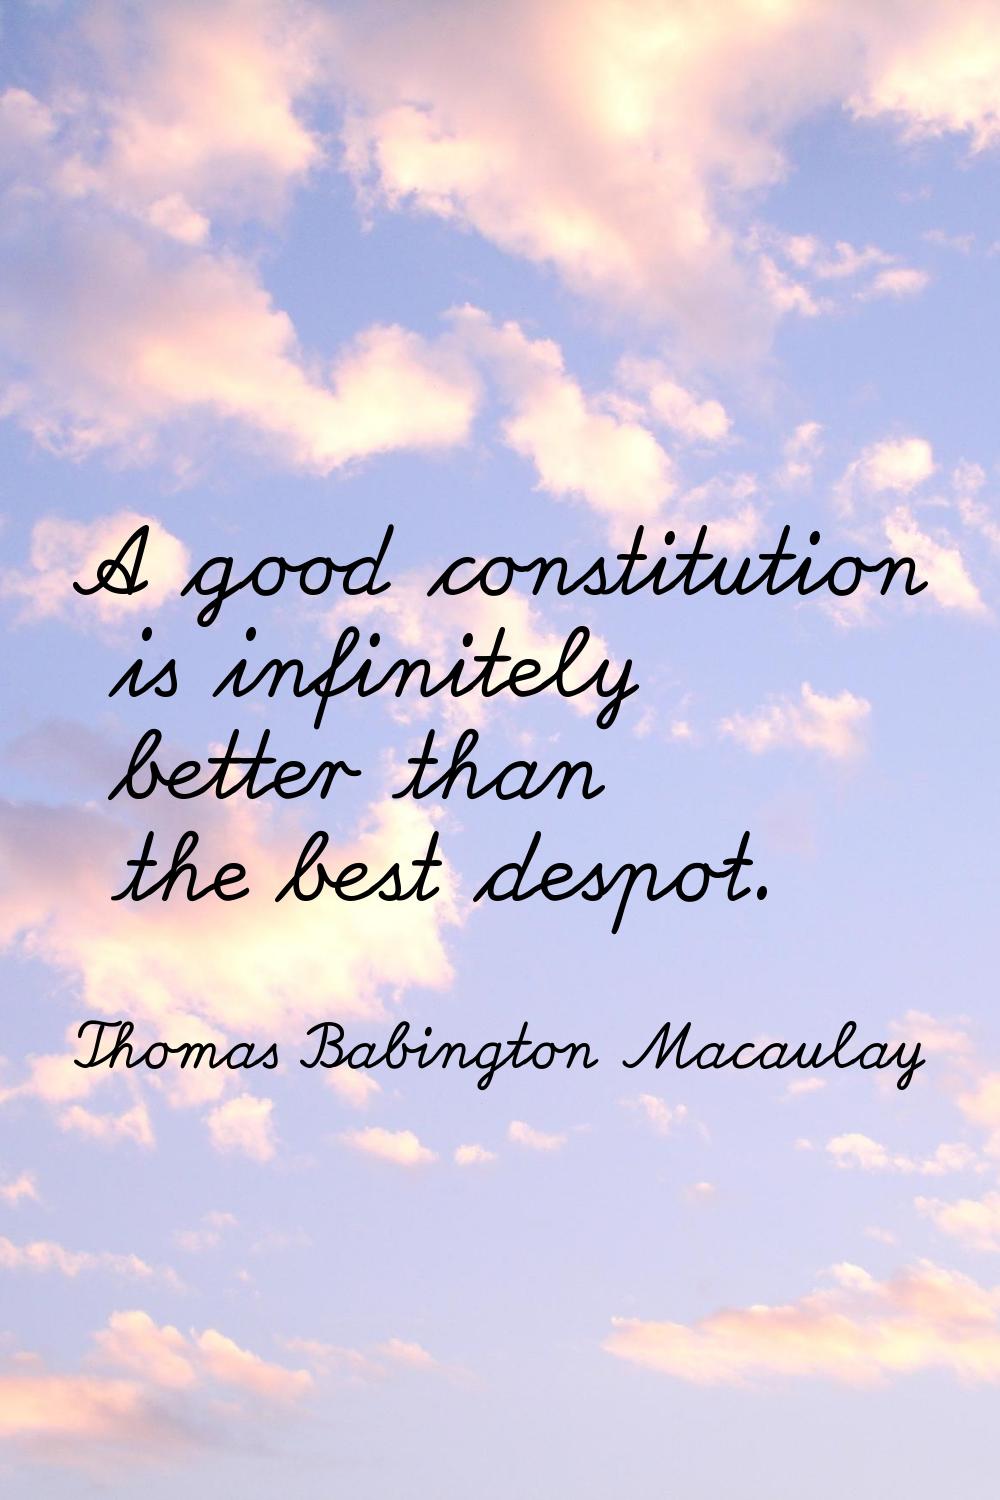 A good constitution is infinitely better than the best despot.